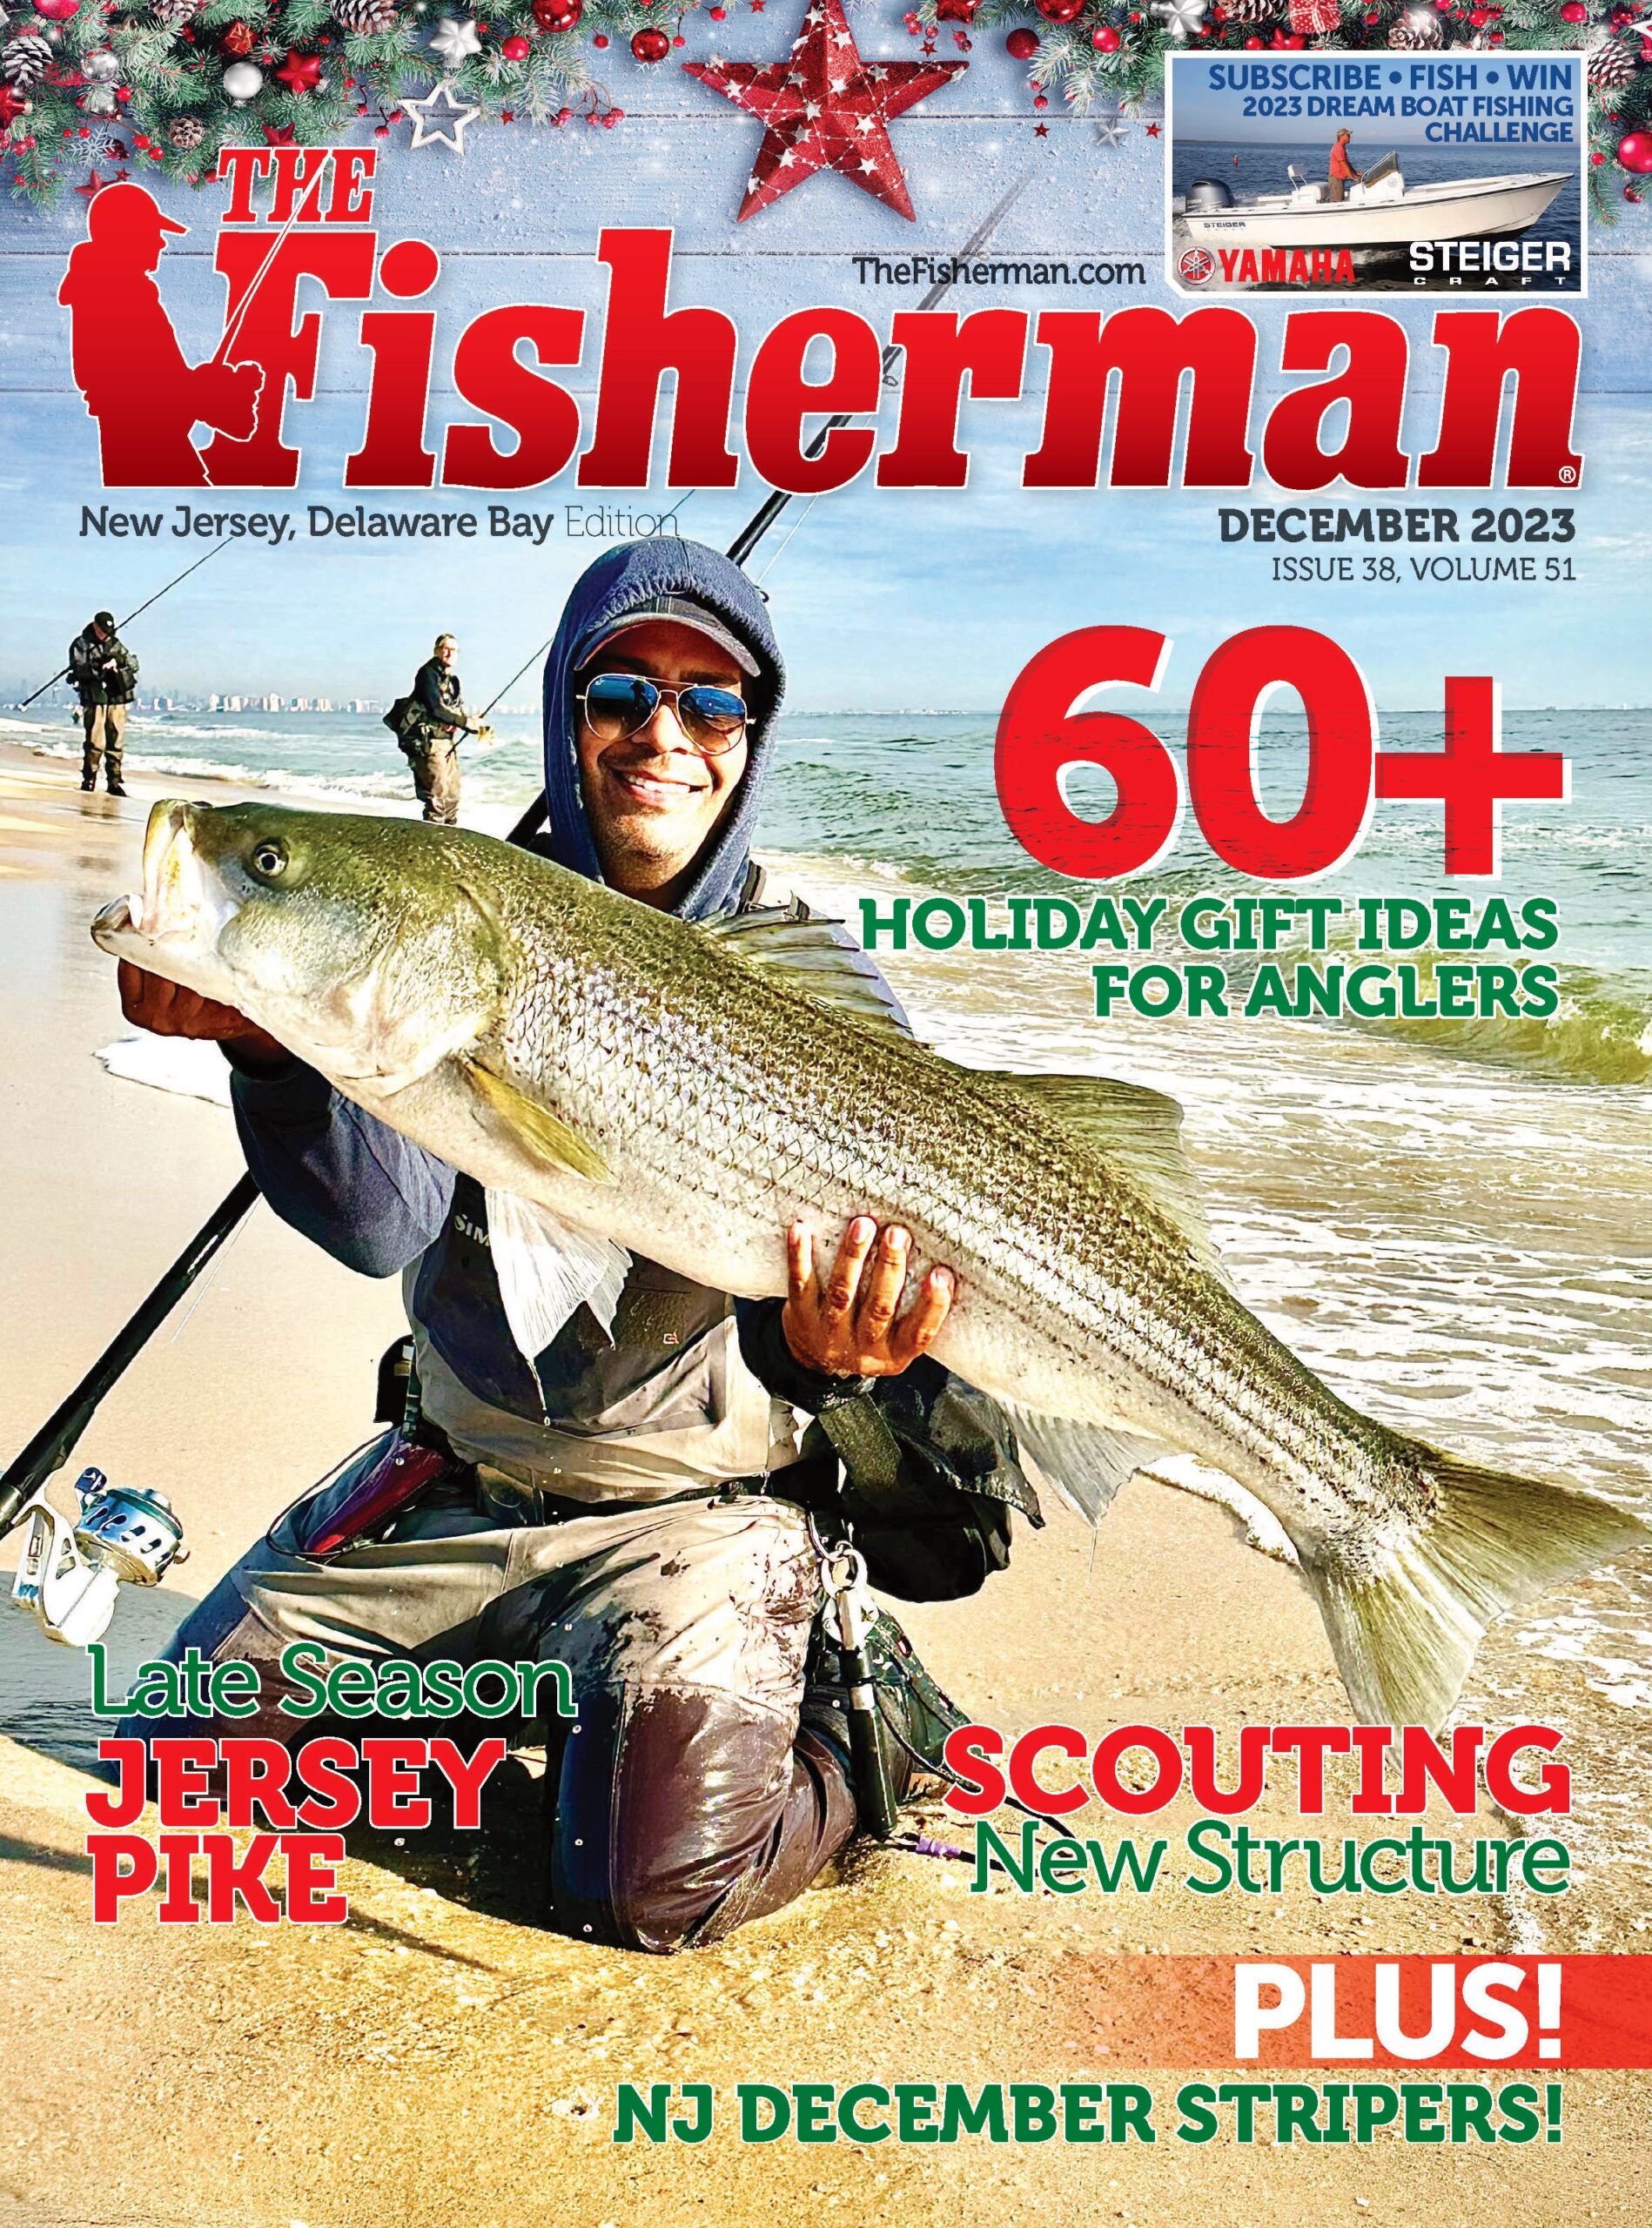 Winter Options? Hit The Pike, At Home, In Jersey! - The Fisherman